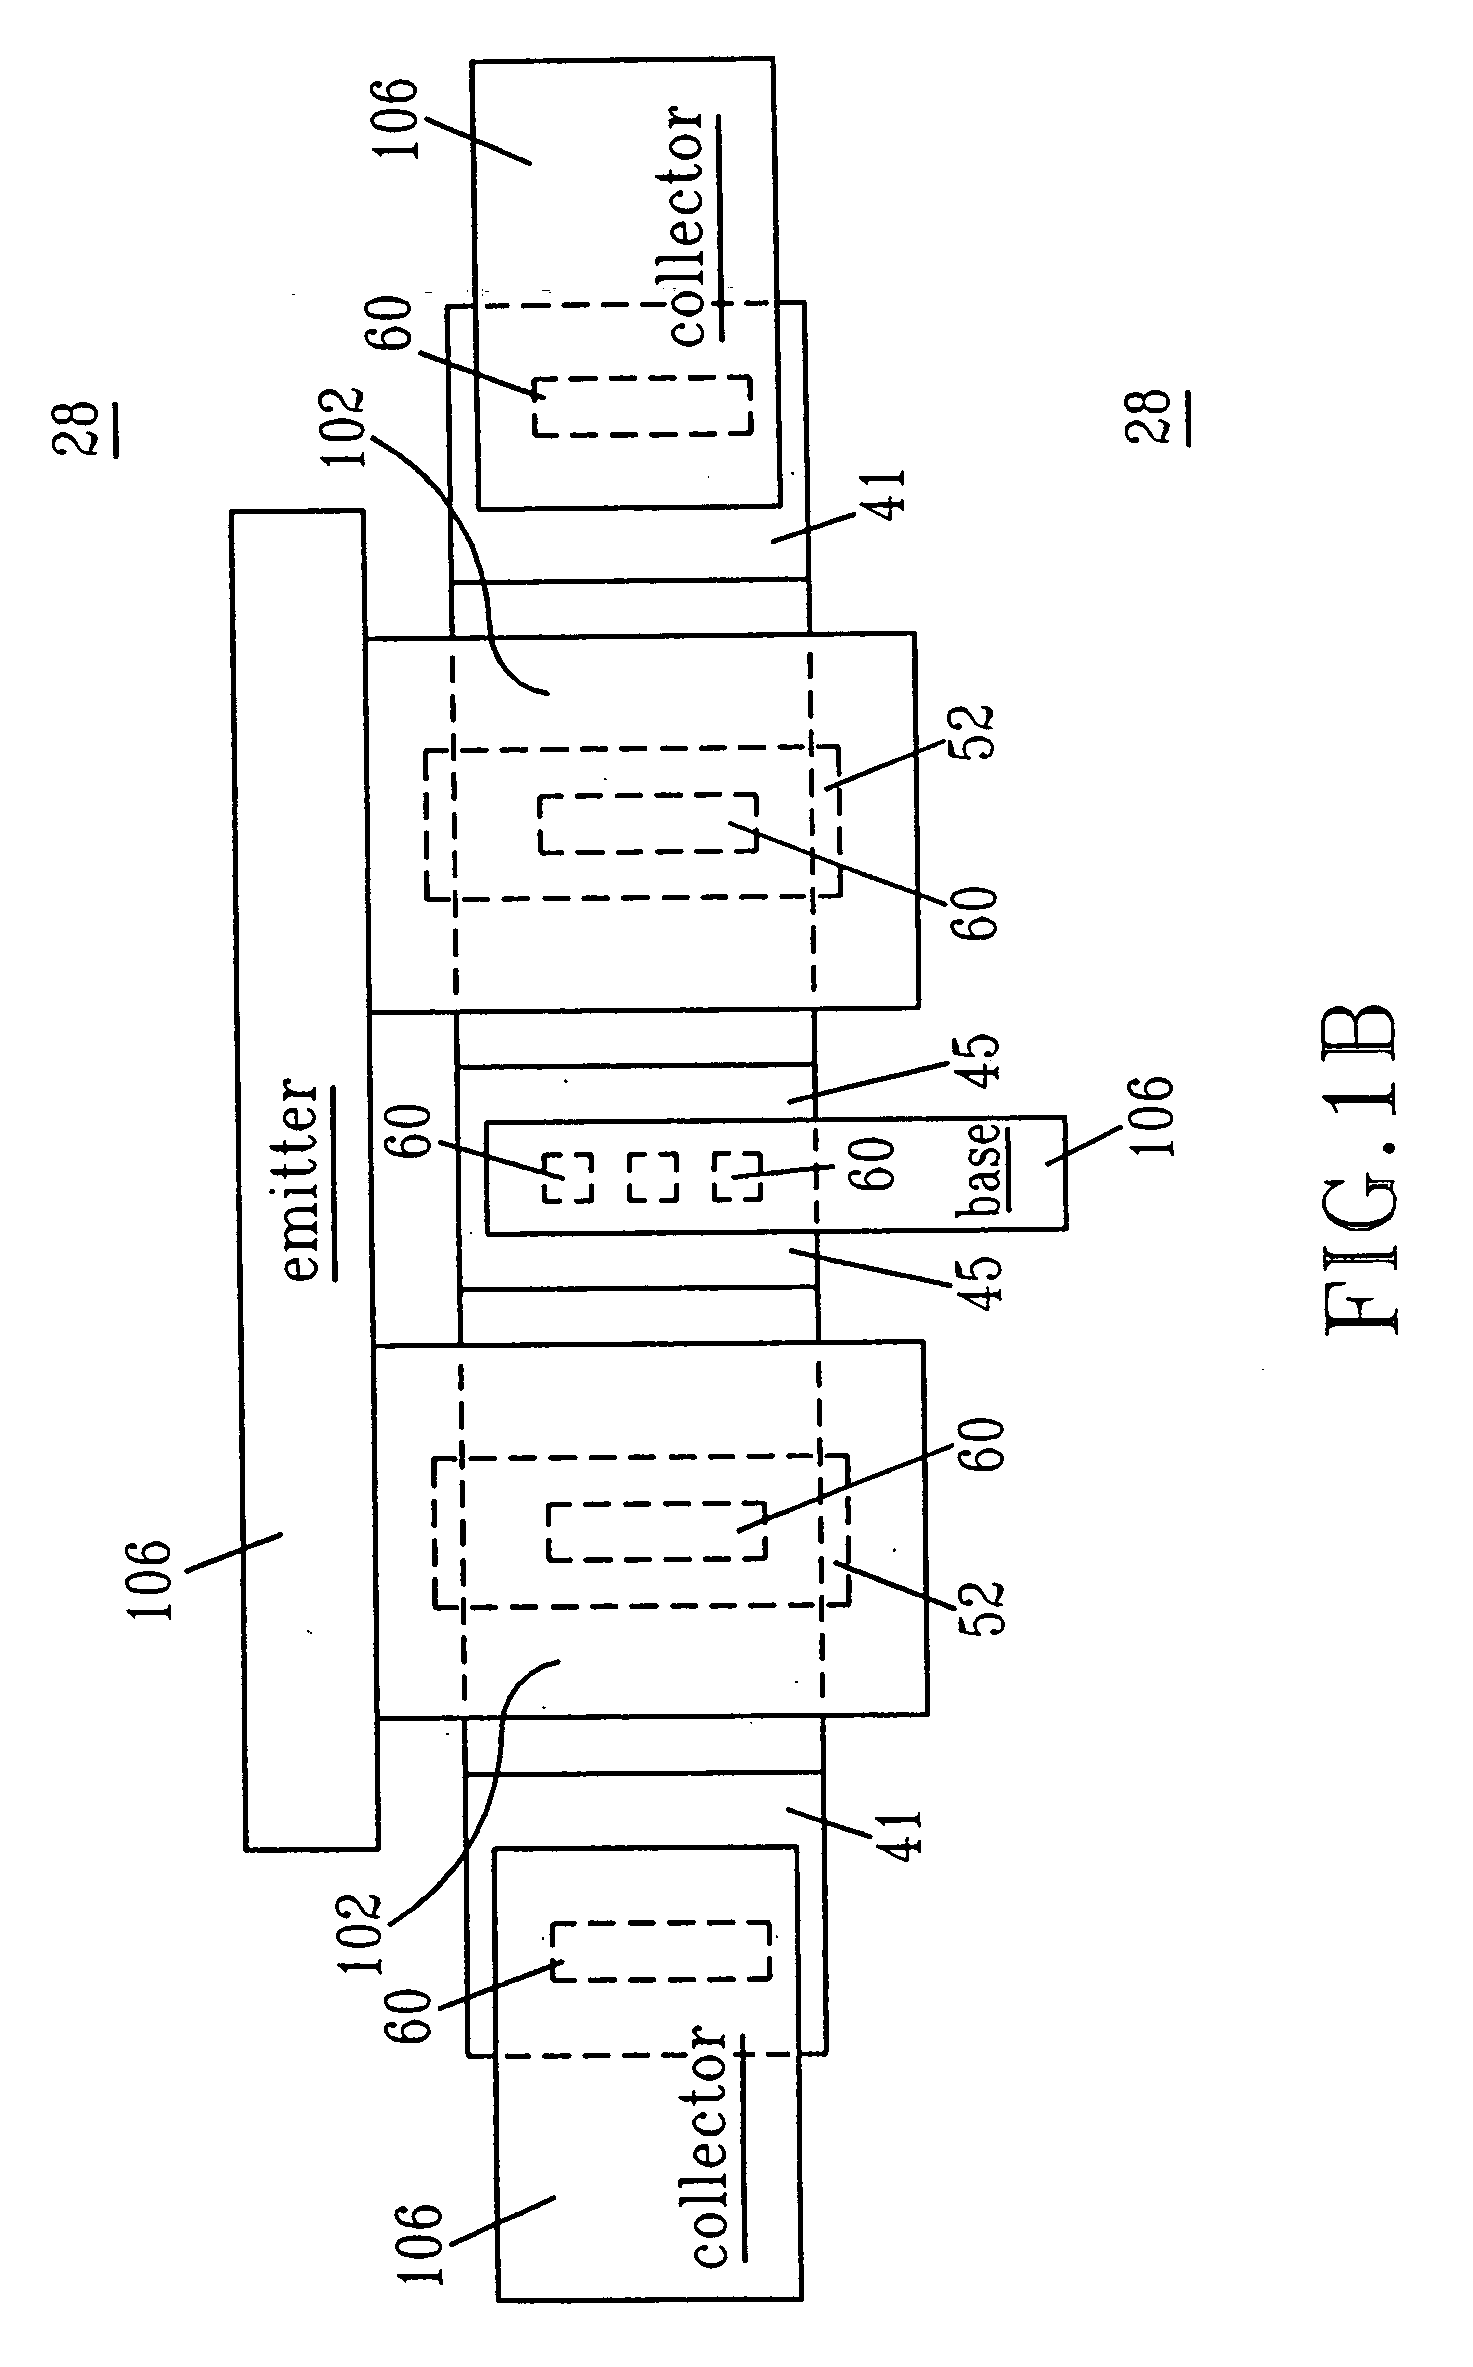 Ultra-thin SOI vertical bipolar transistors with an inversion collector on thin-buried oxide (BOX) for low substrate-bias operation and methods thereof